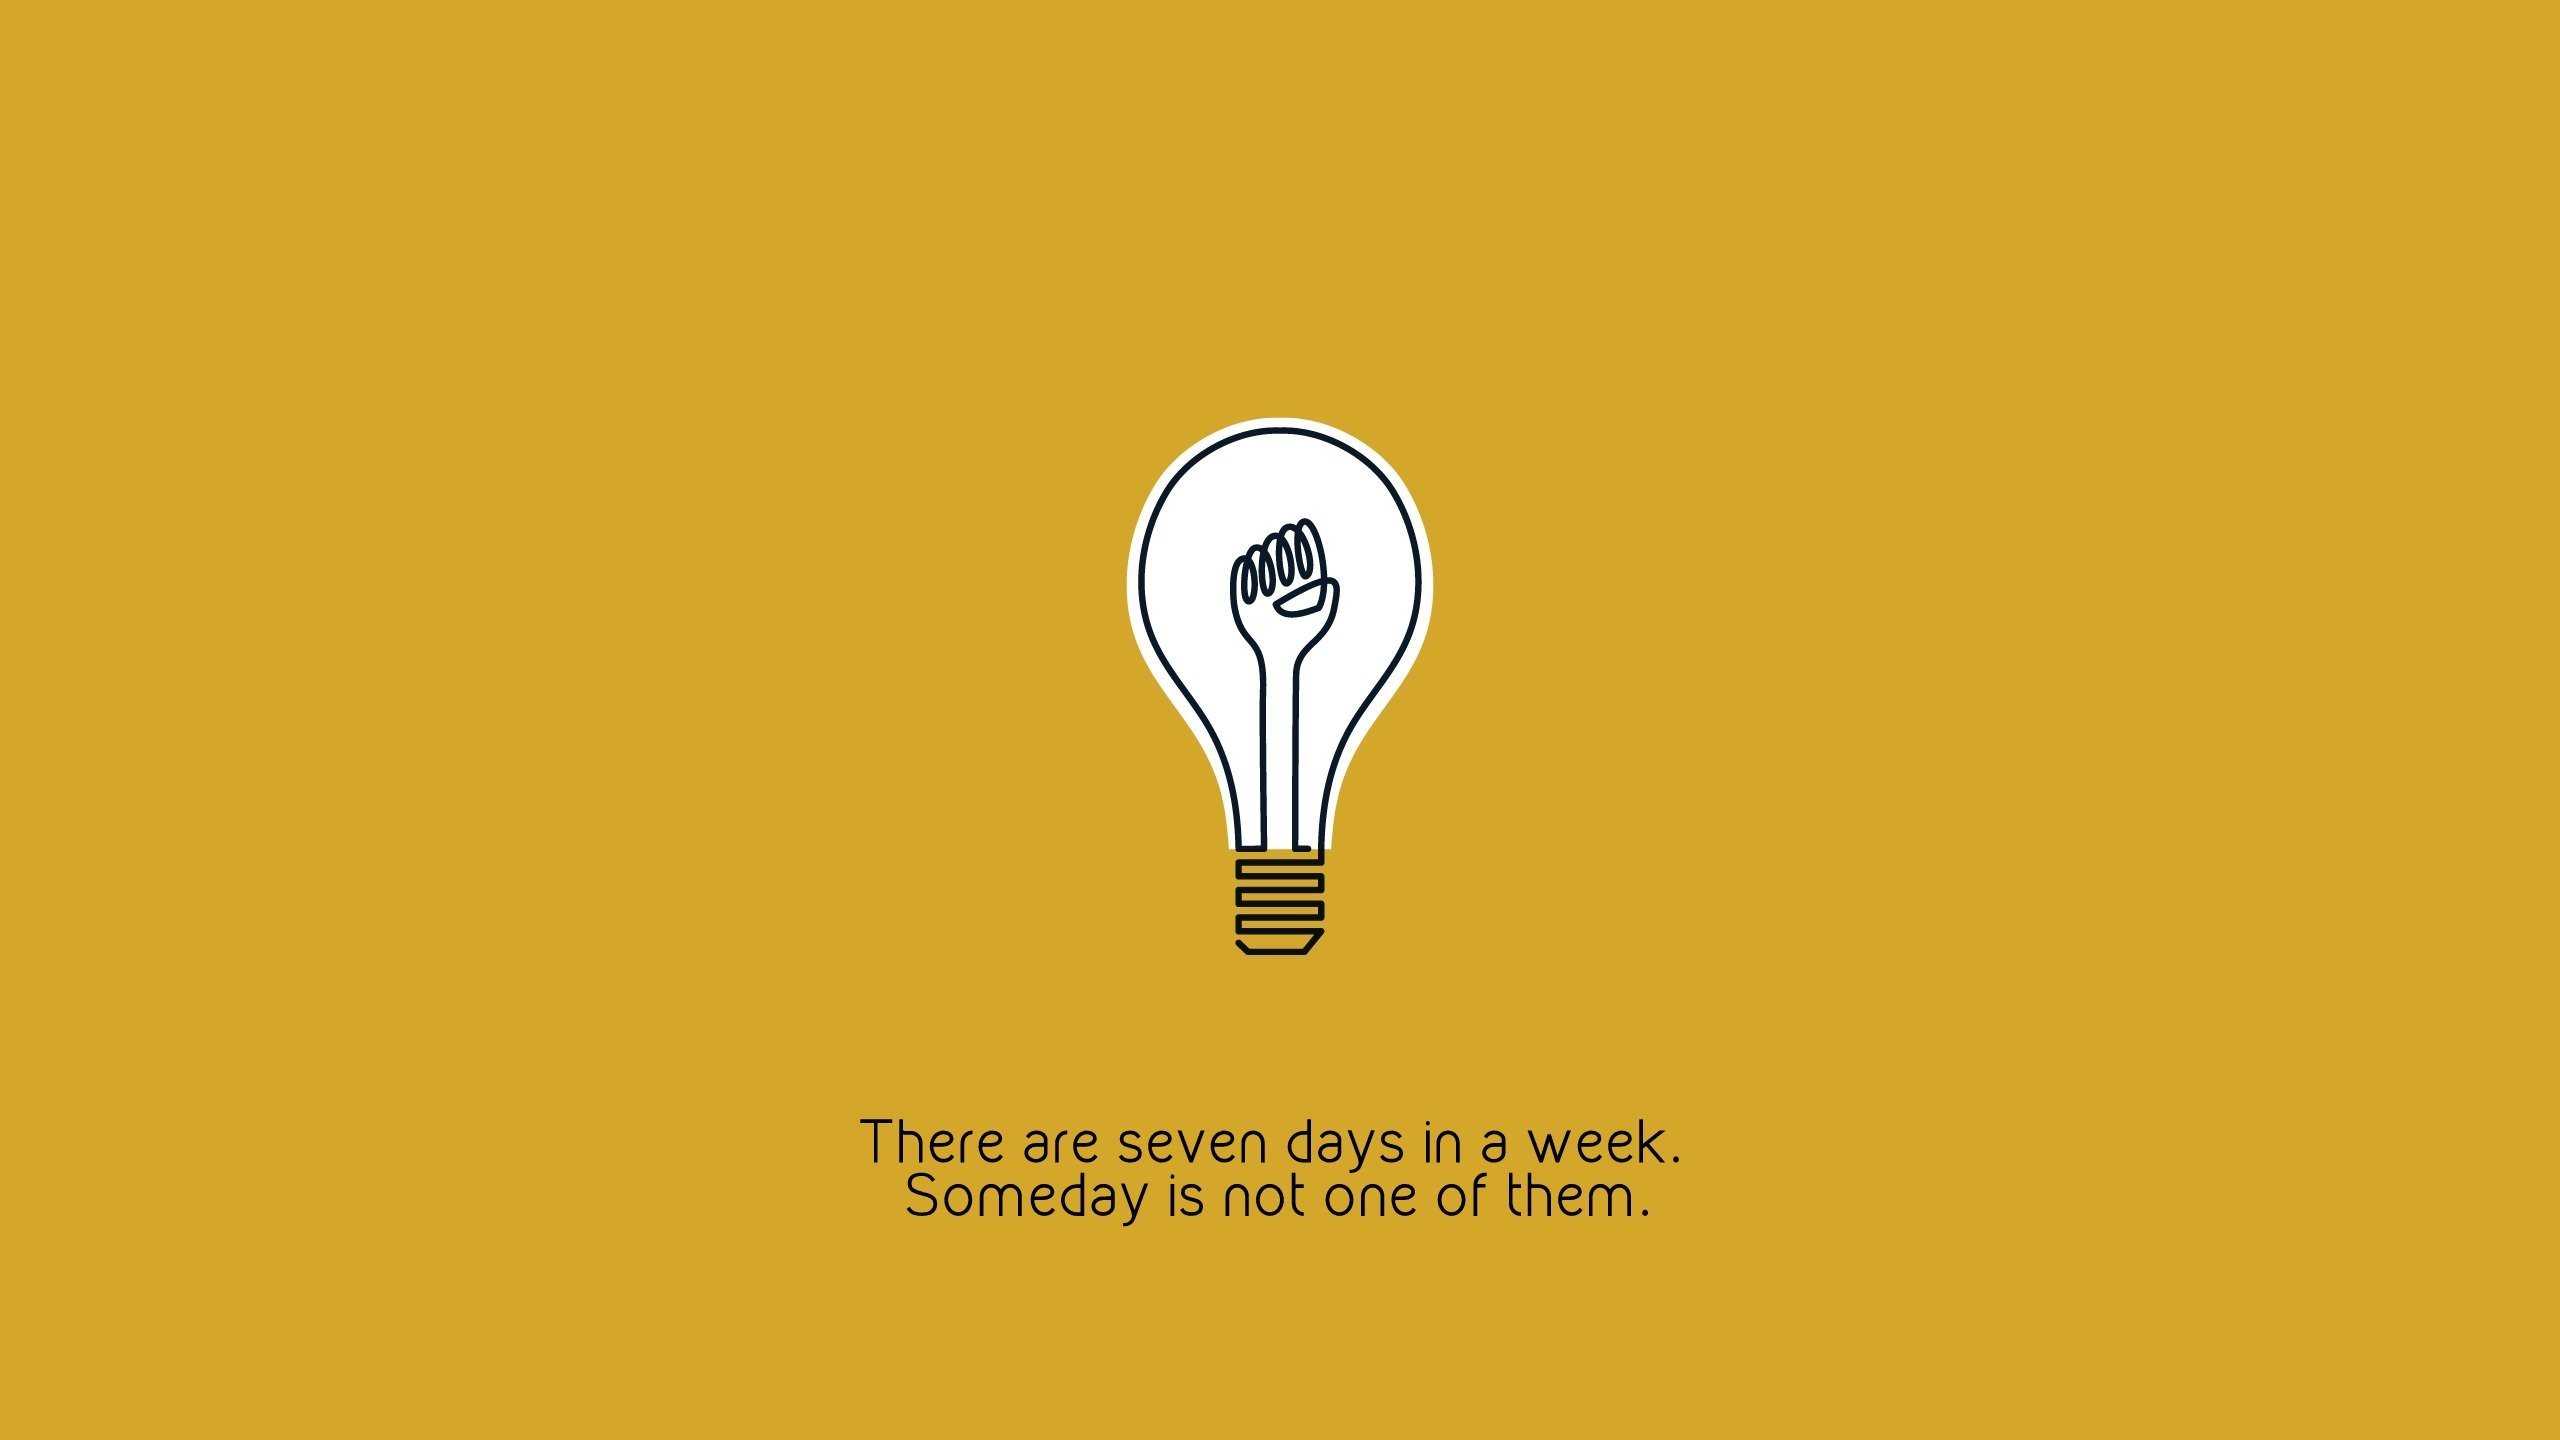 There are only 7 days in the week Wallpaper for Desktop 2560x1440